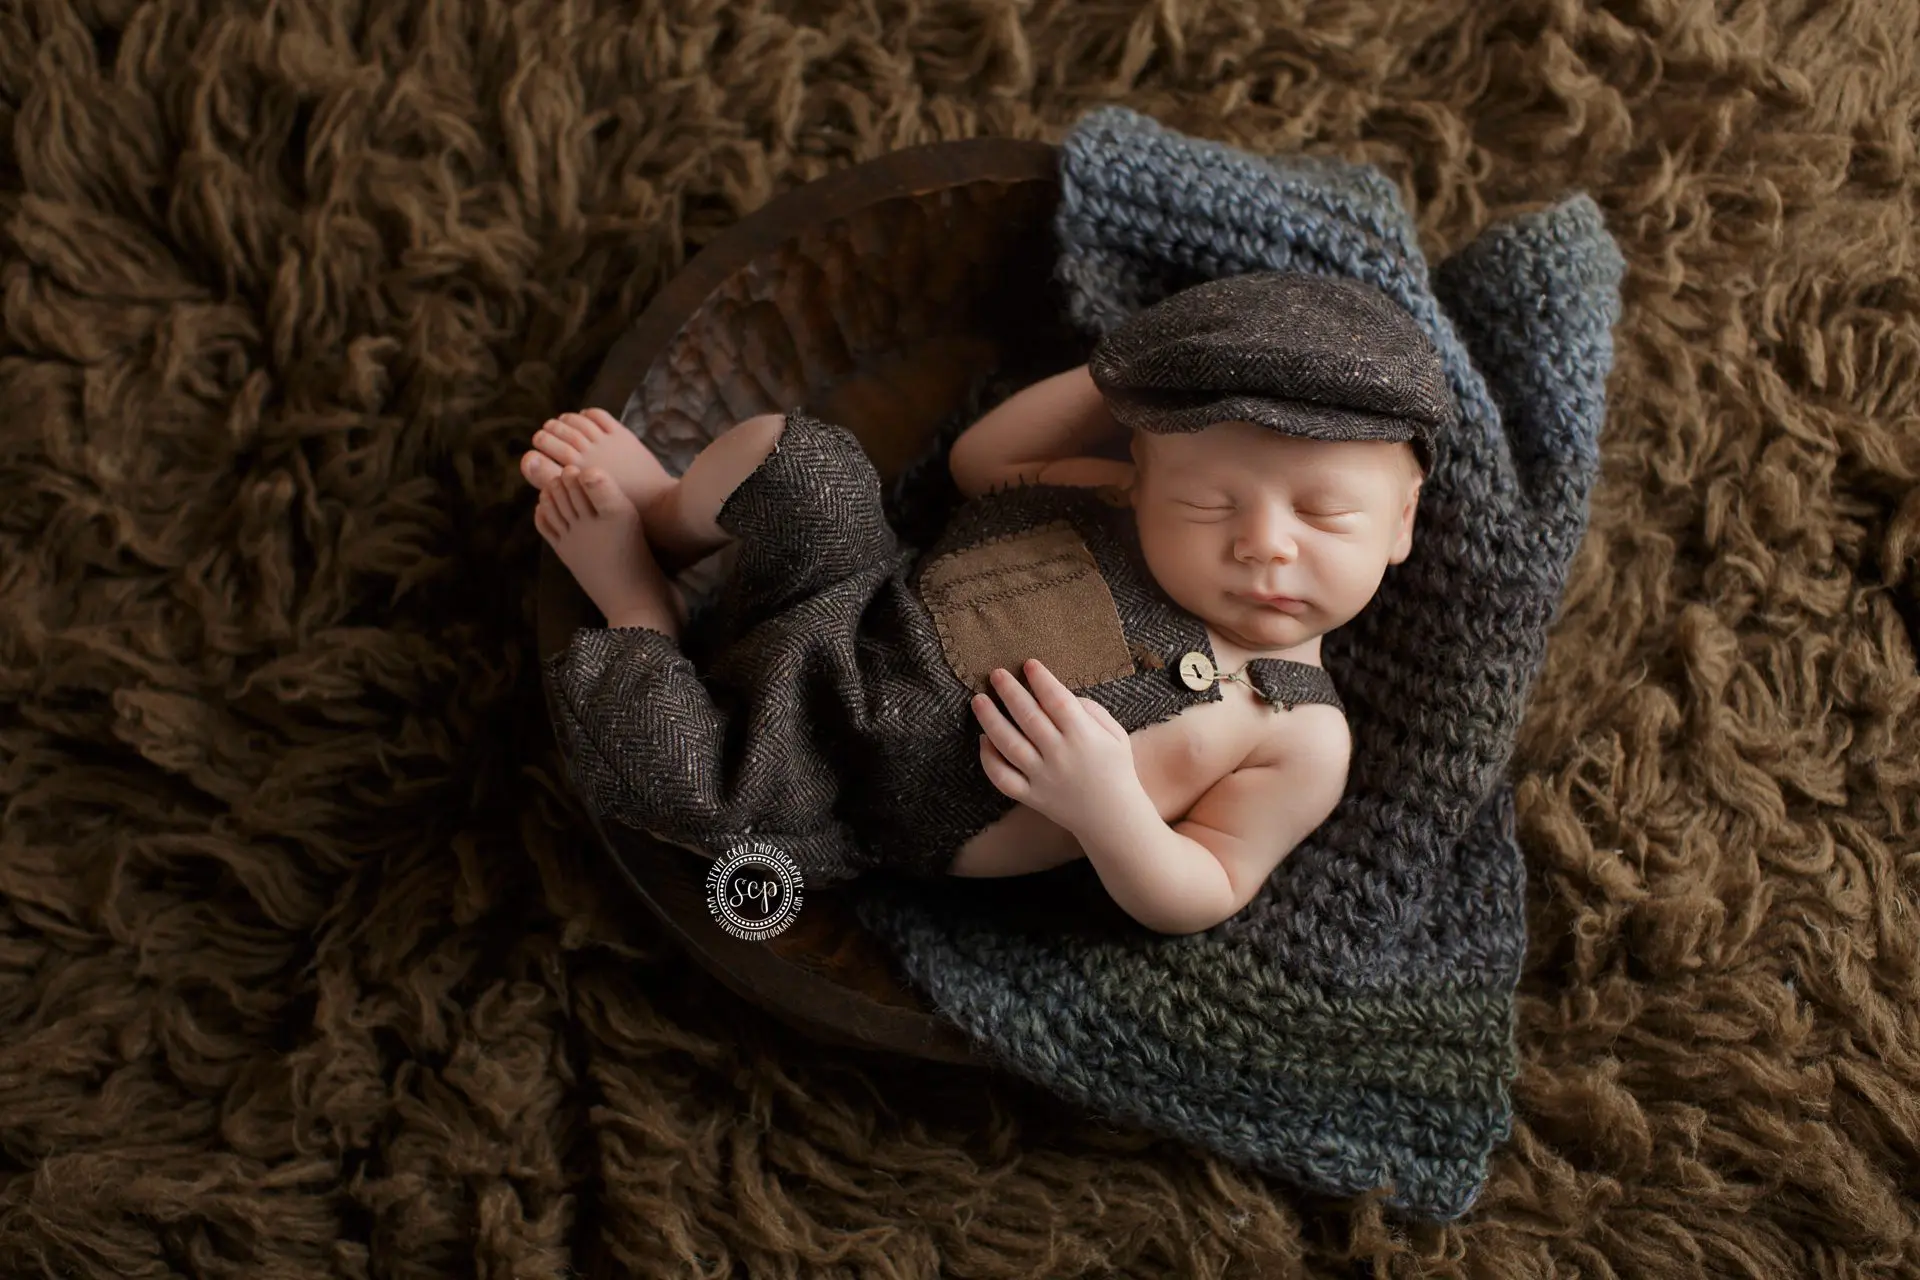 Sweet baby boy newborn photos in Yorba Linda CA. Love this vintage overalls and hat this newborn is wearing